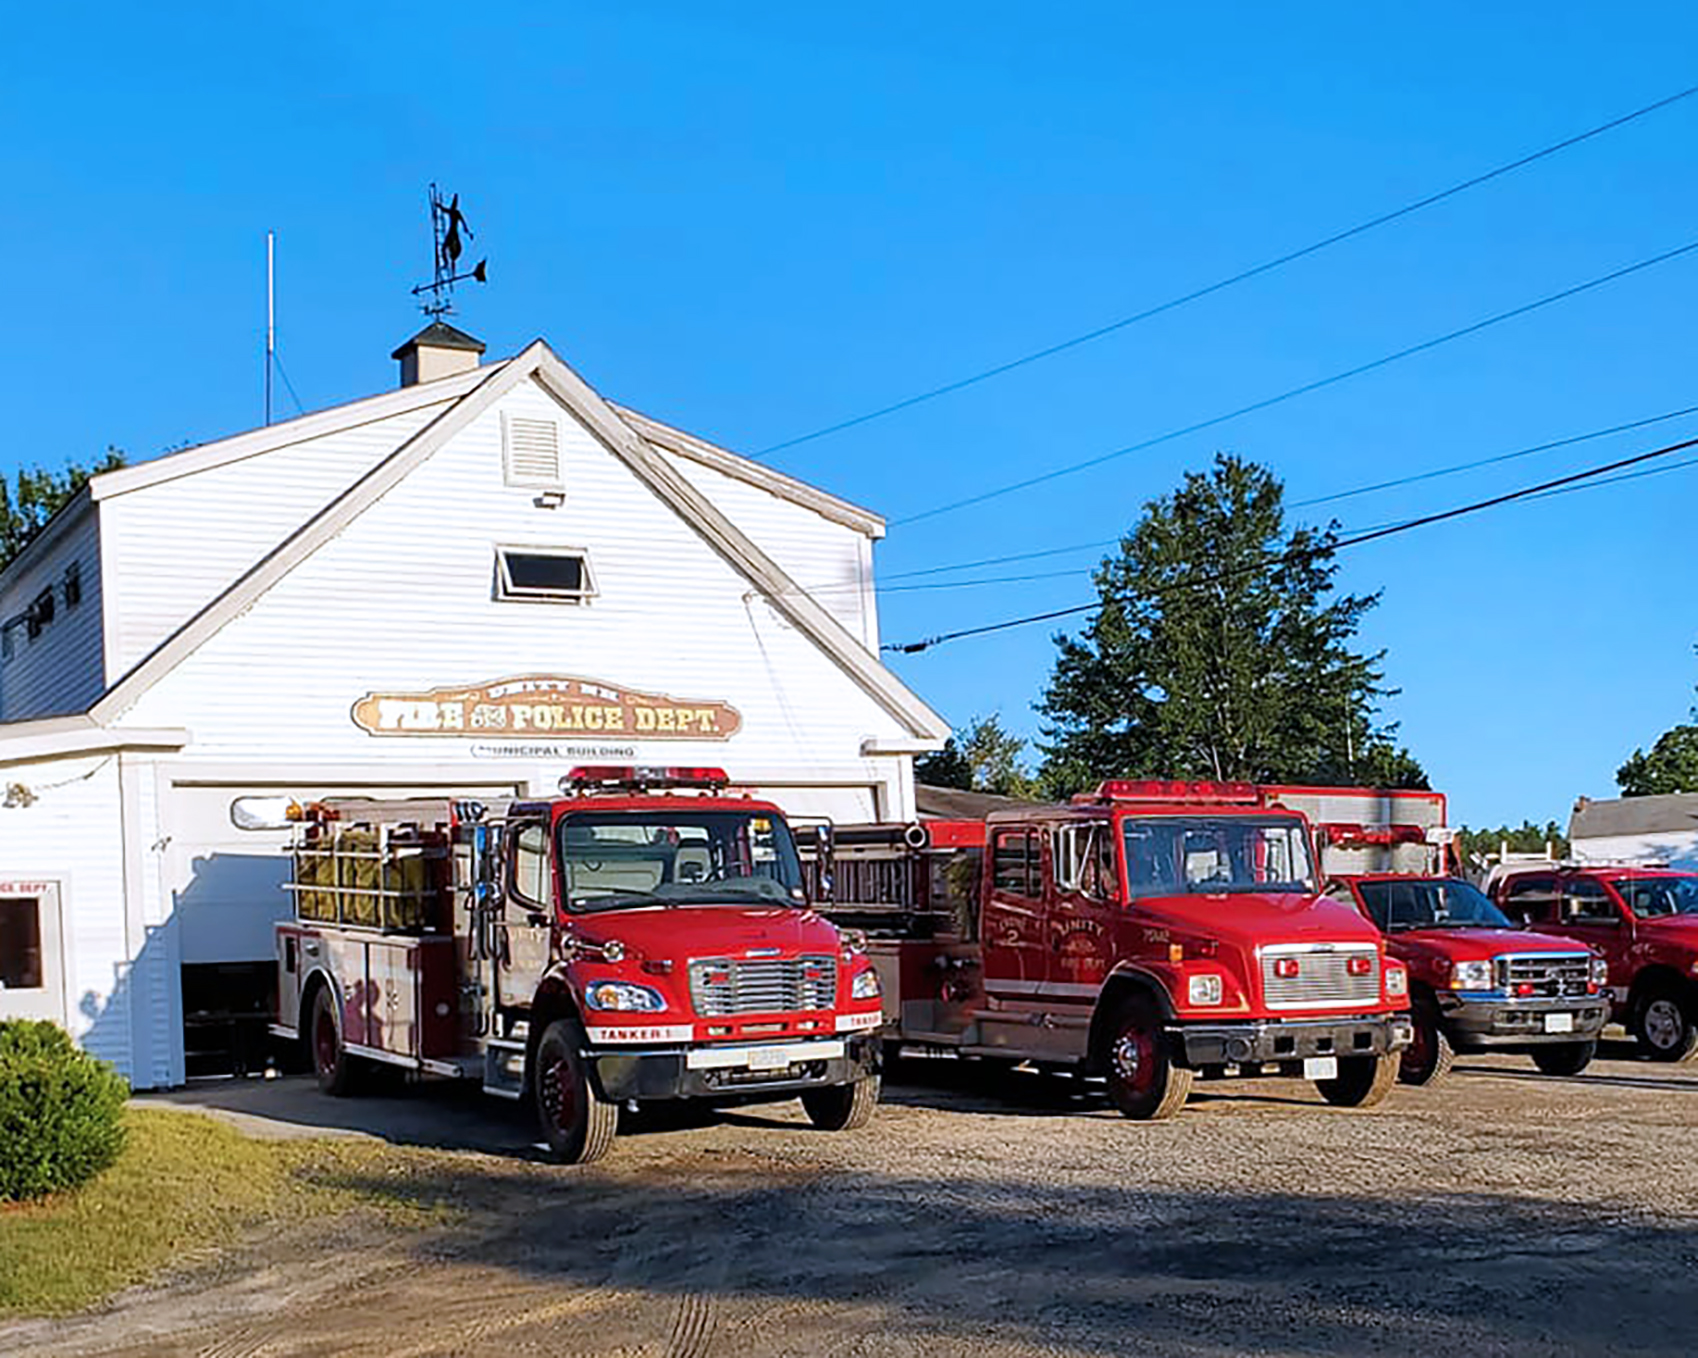 Several red and white Town of Unity NH Fire Department firetrucks and rescue vehicles.